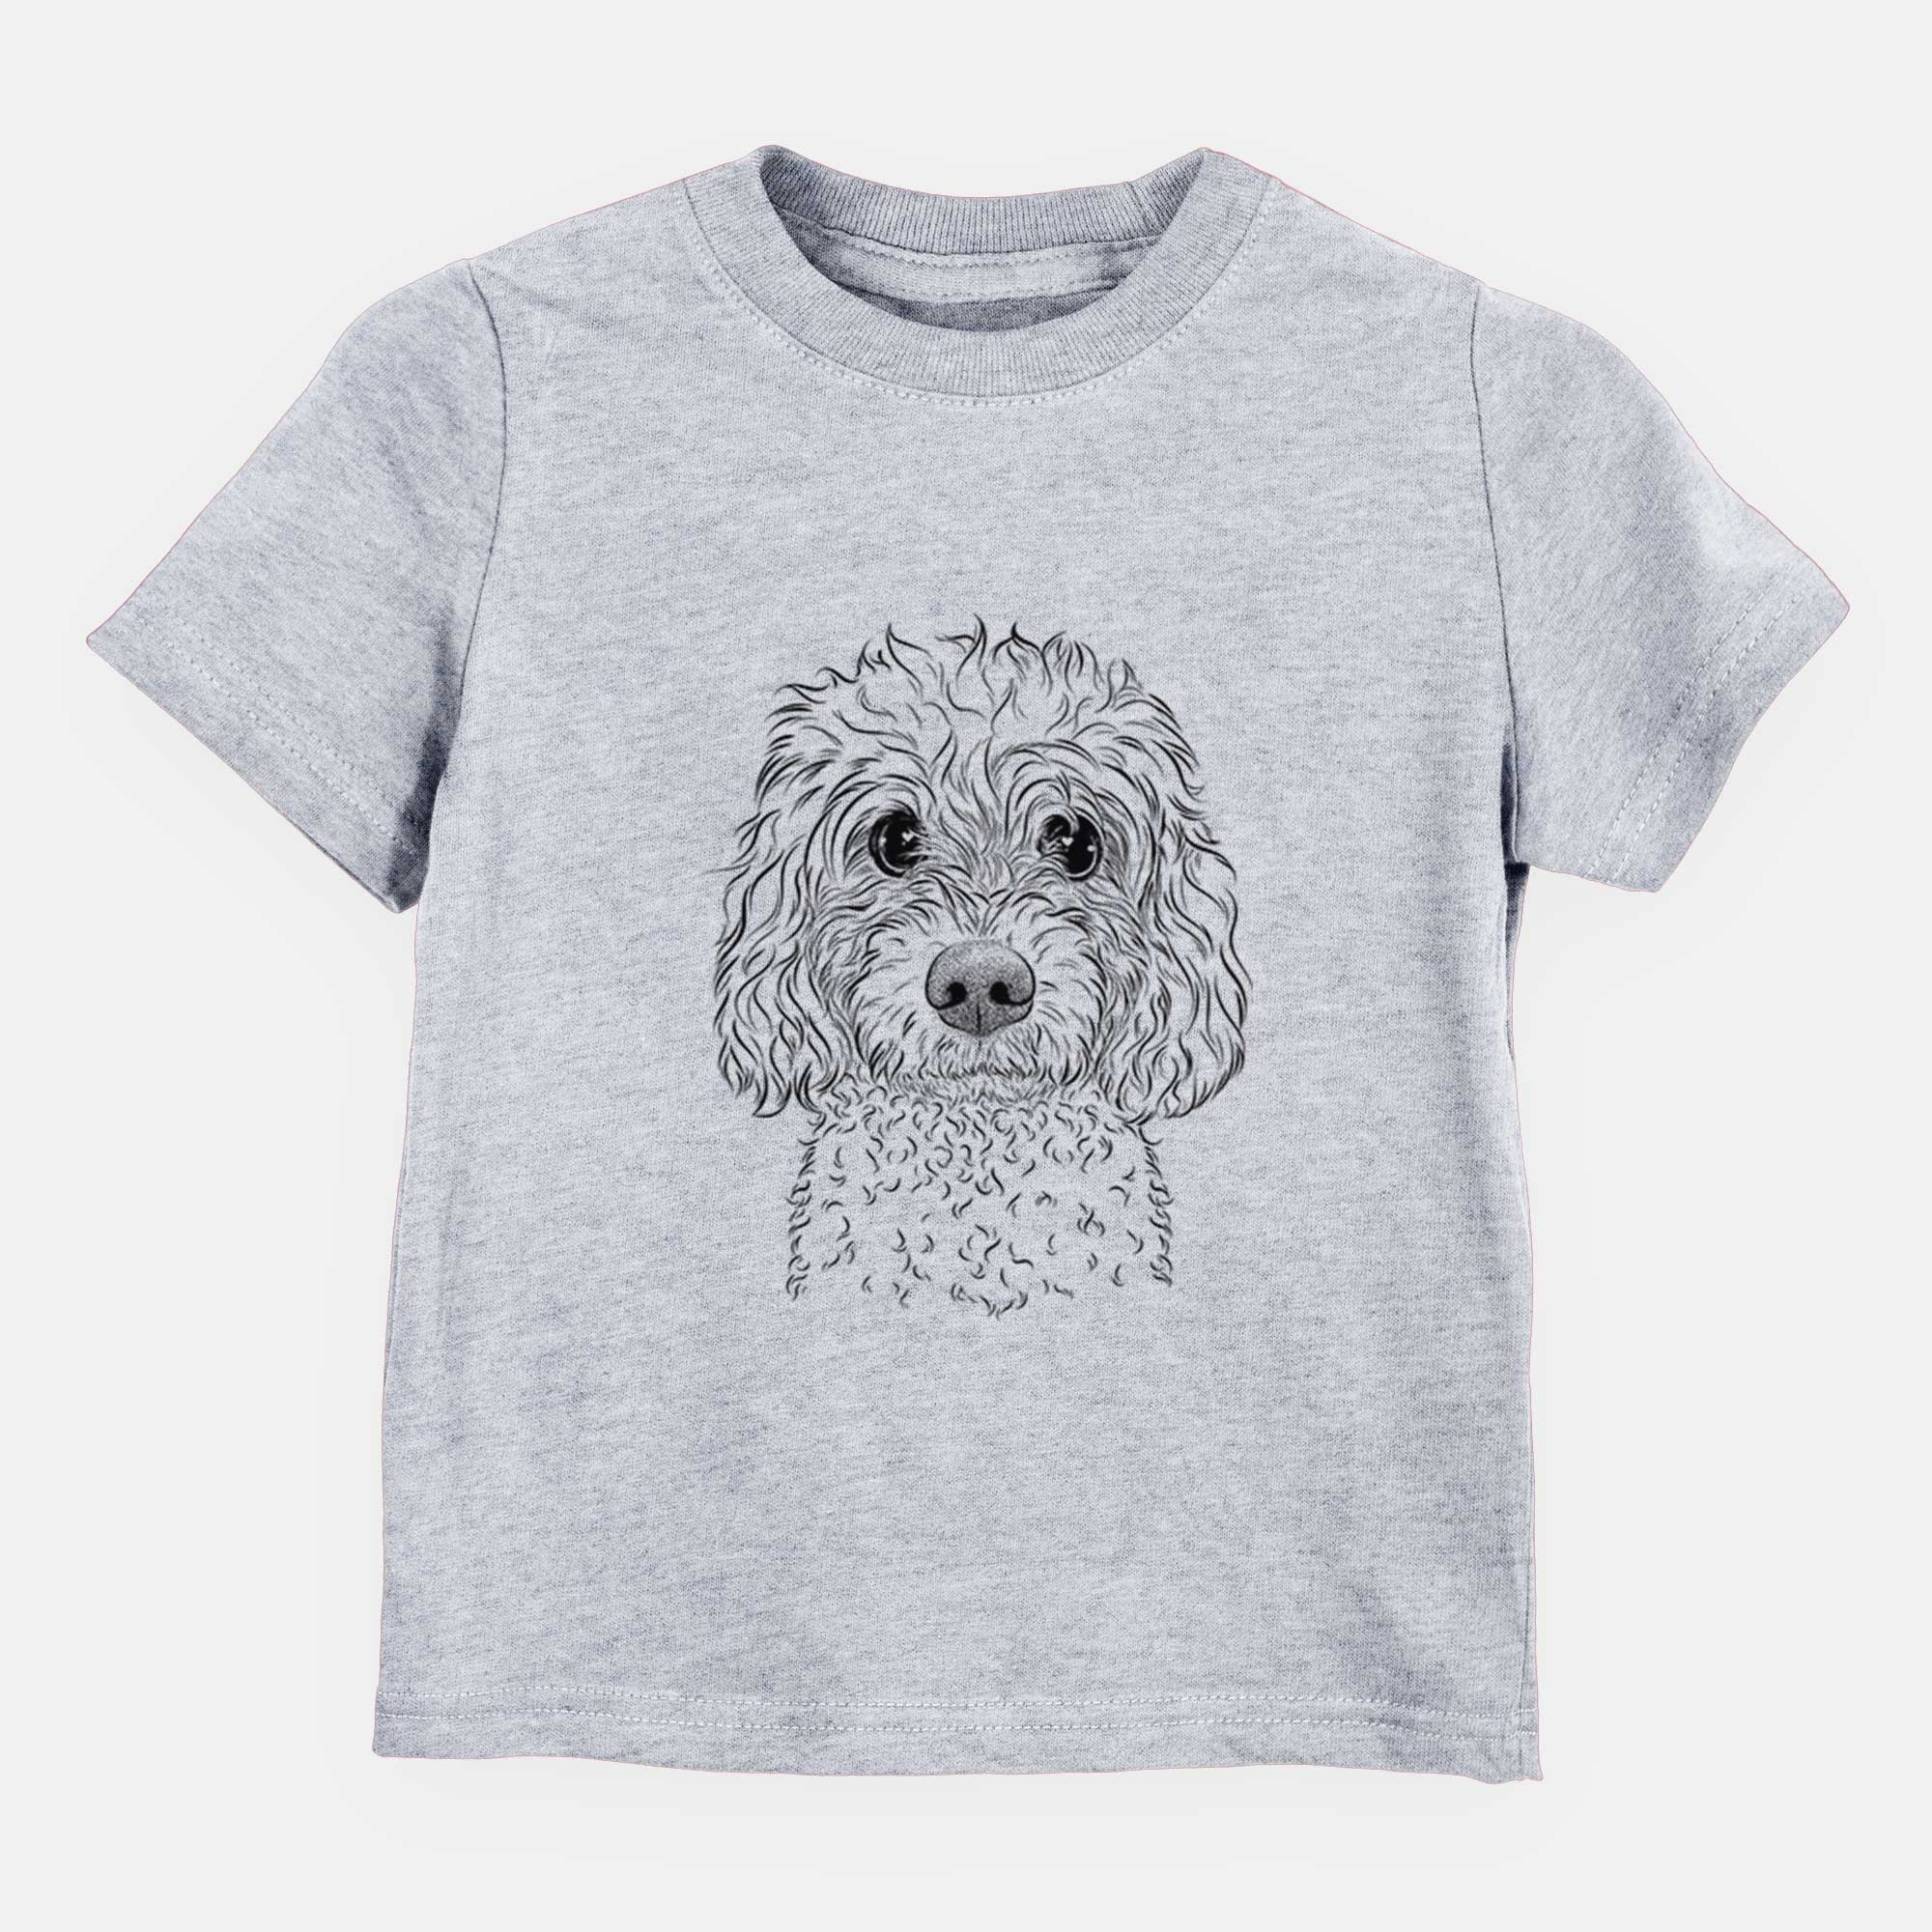 Bare Izzie the Cavachon - Kids/Youth/Toddler Shirt